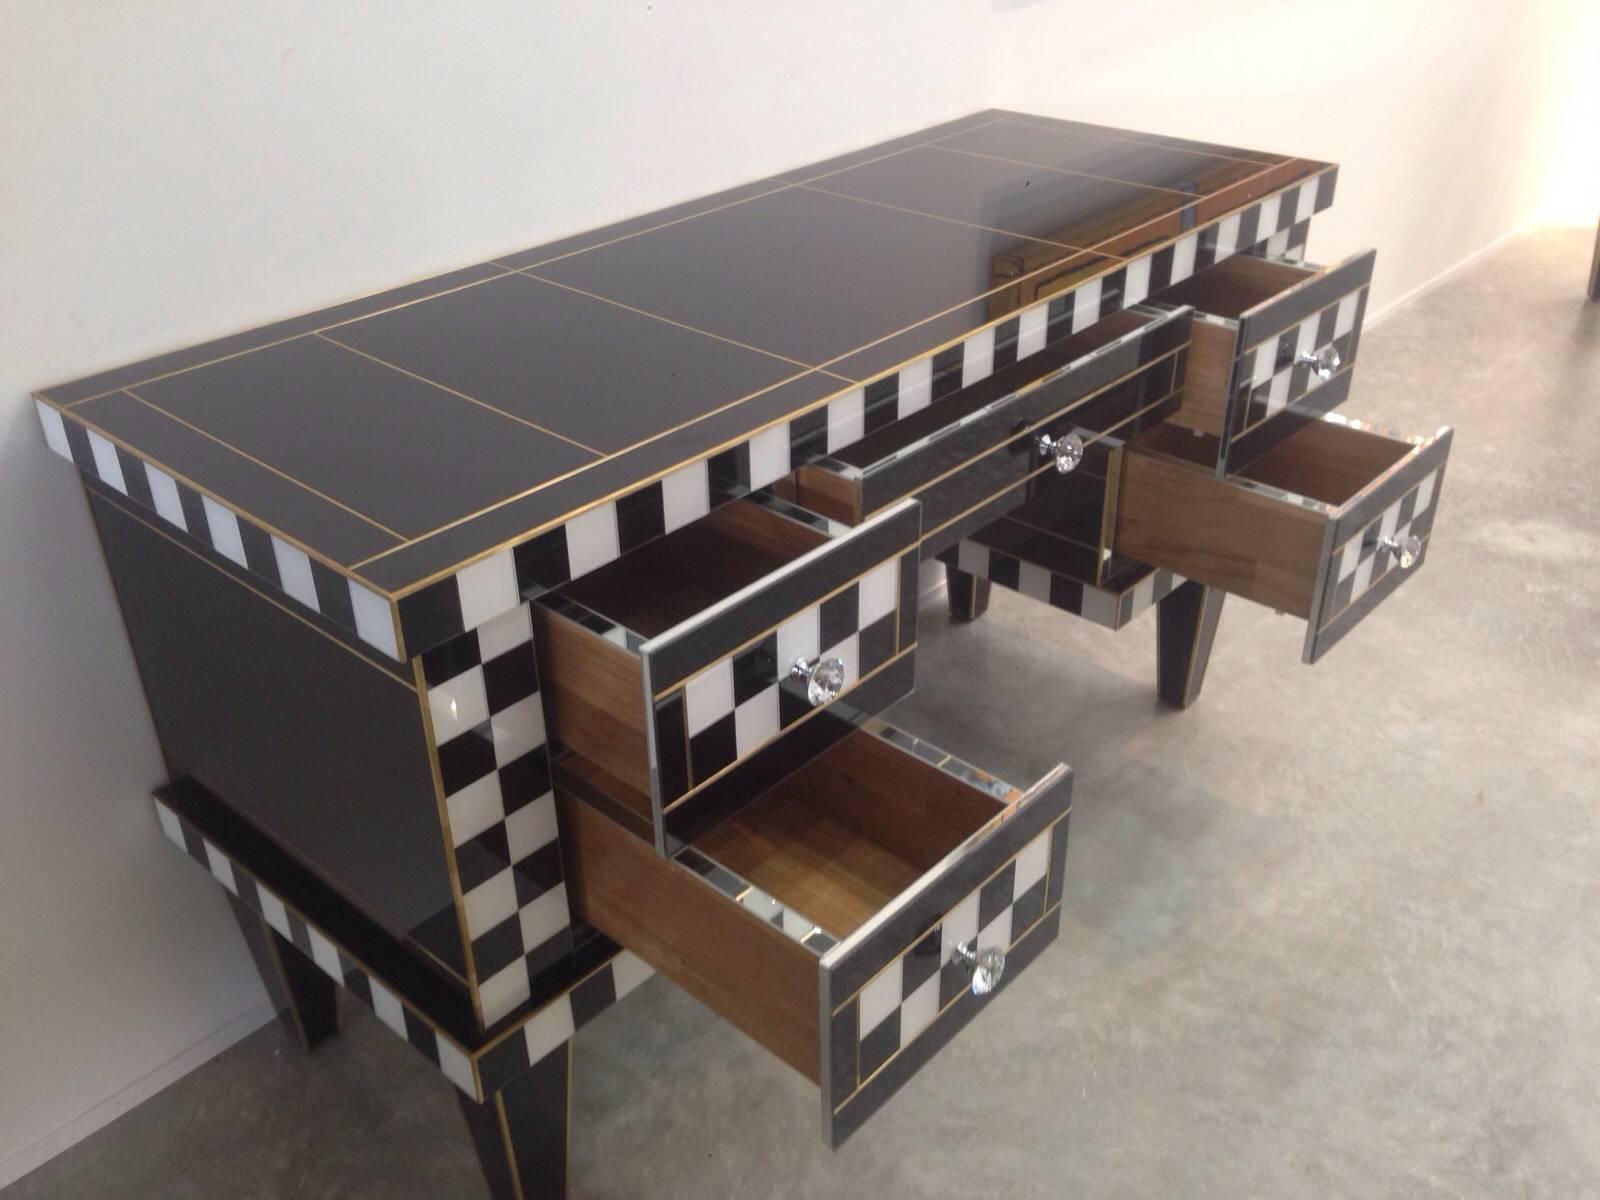 Lovely Black & White mirror Desk or vanity table
Glamorous mirrored desk signed by designer
A statement of elegance and quality
Fantastic design with black and white decoration
Single piece of the colection
Mirrored